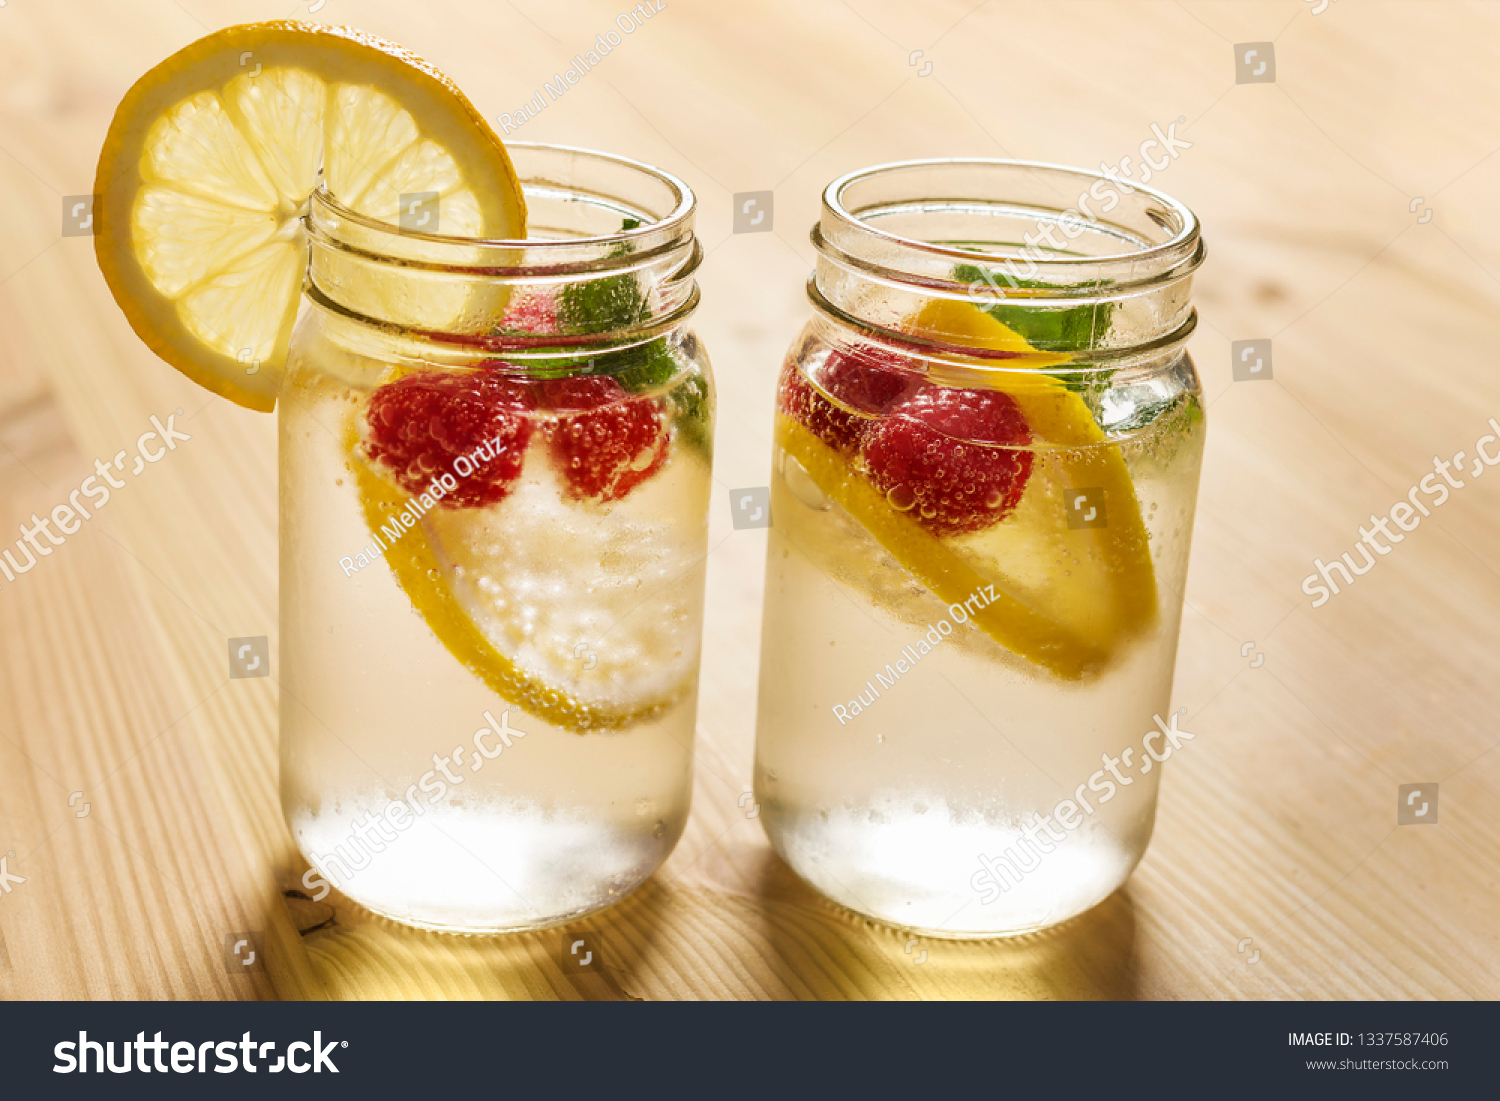 two glass jars with cold water, slices of lemon, mint and red berries, illuminated by sunlight on a wooden table with some pieces of citrus, summer refreshments background, copy space #1337587406